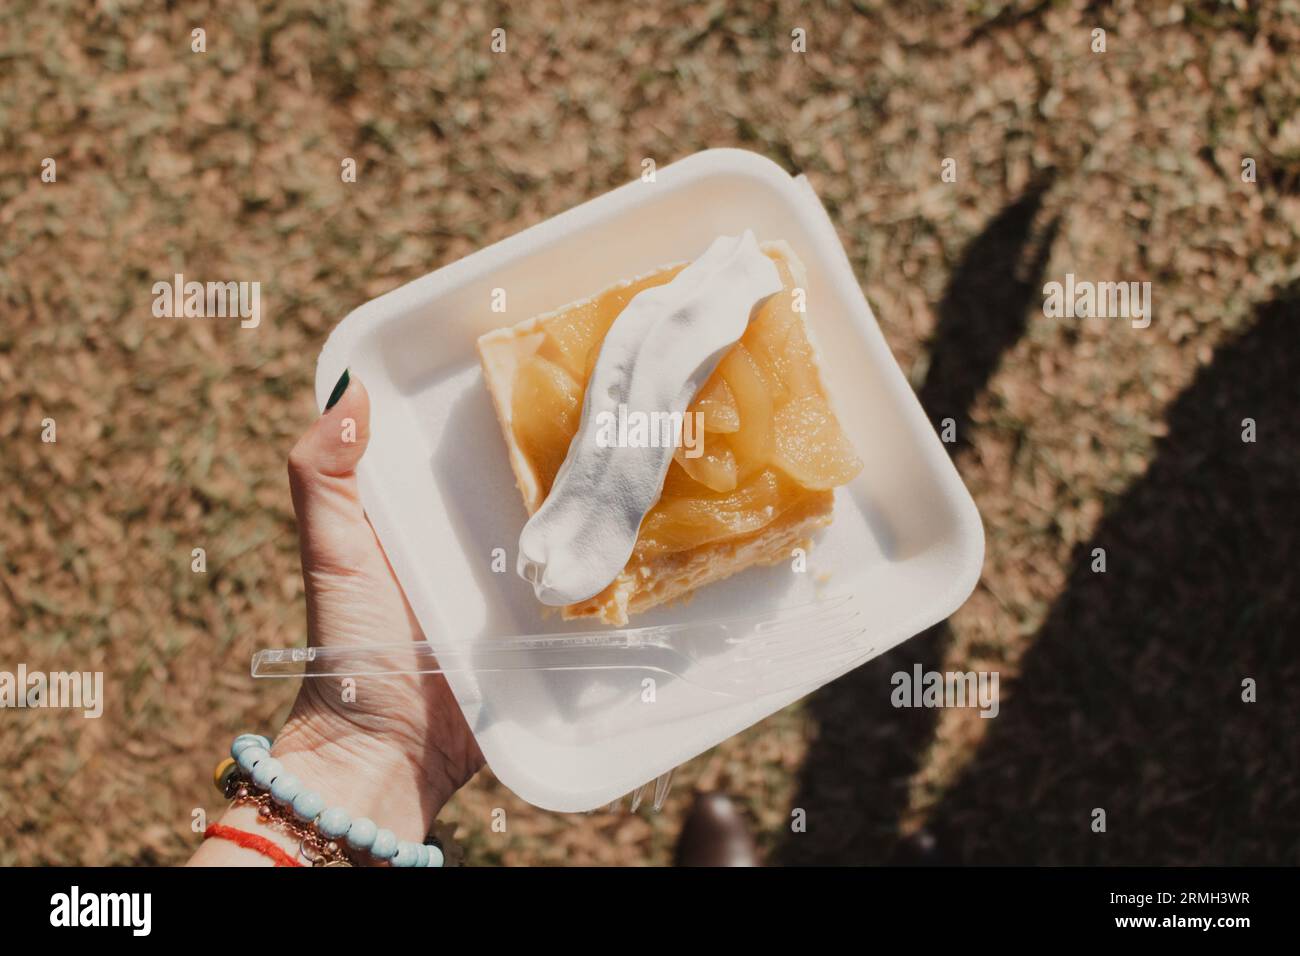 holding a disposable plate of apple pie Stock Photo